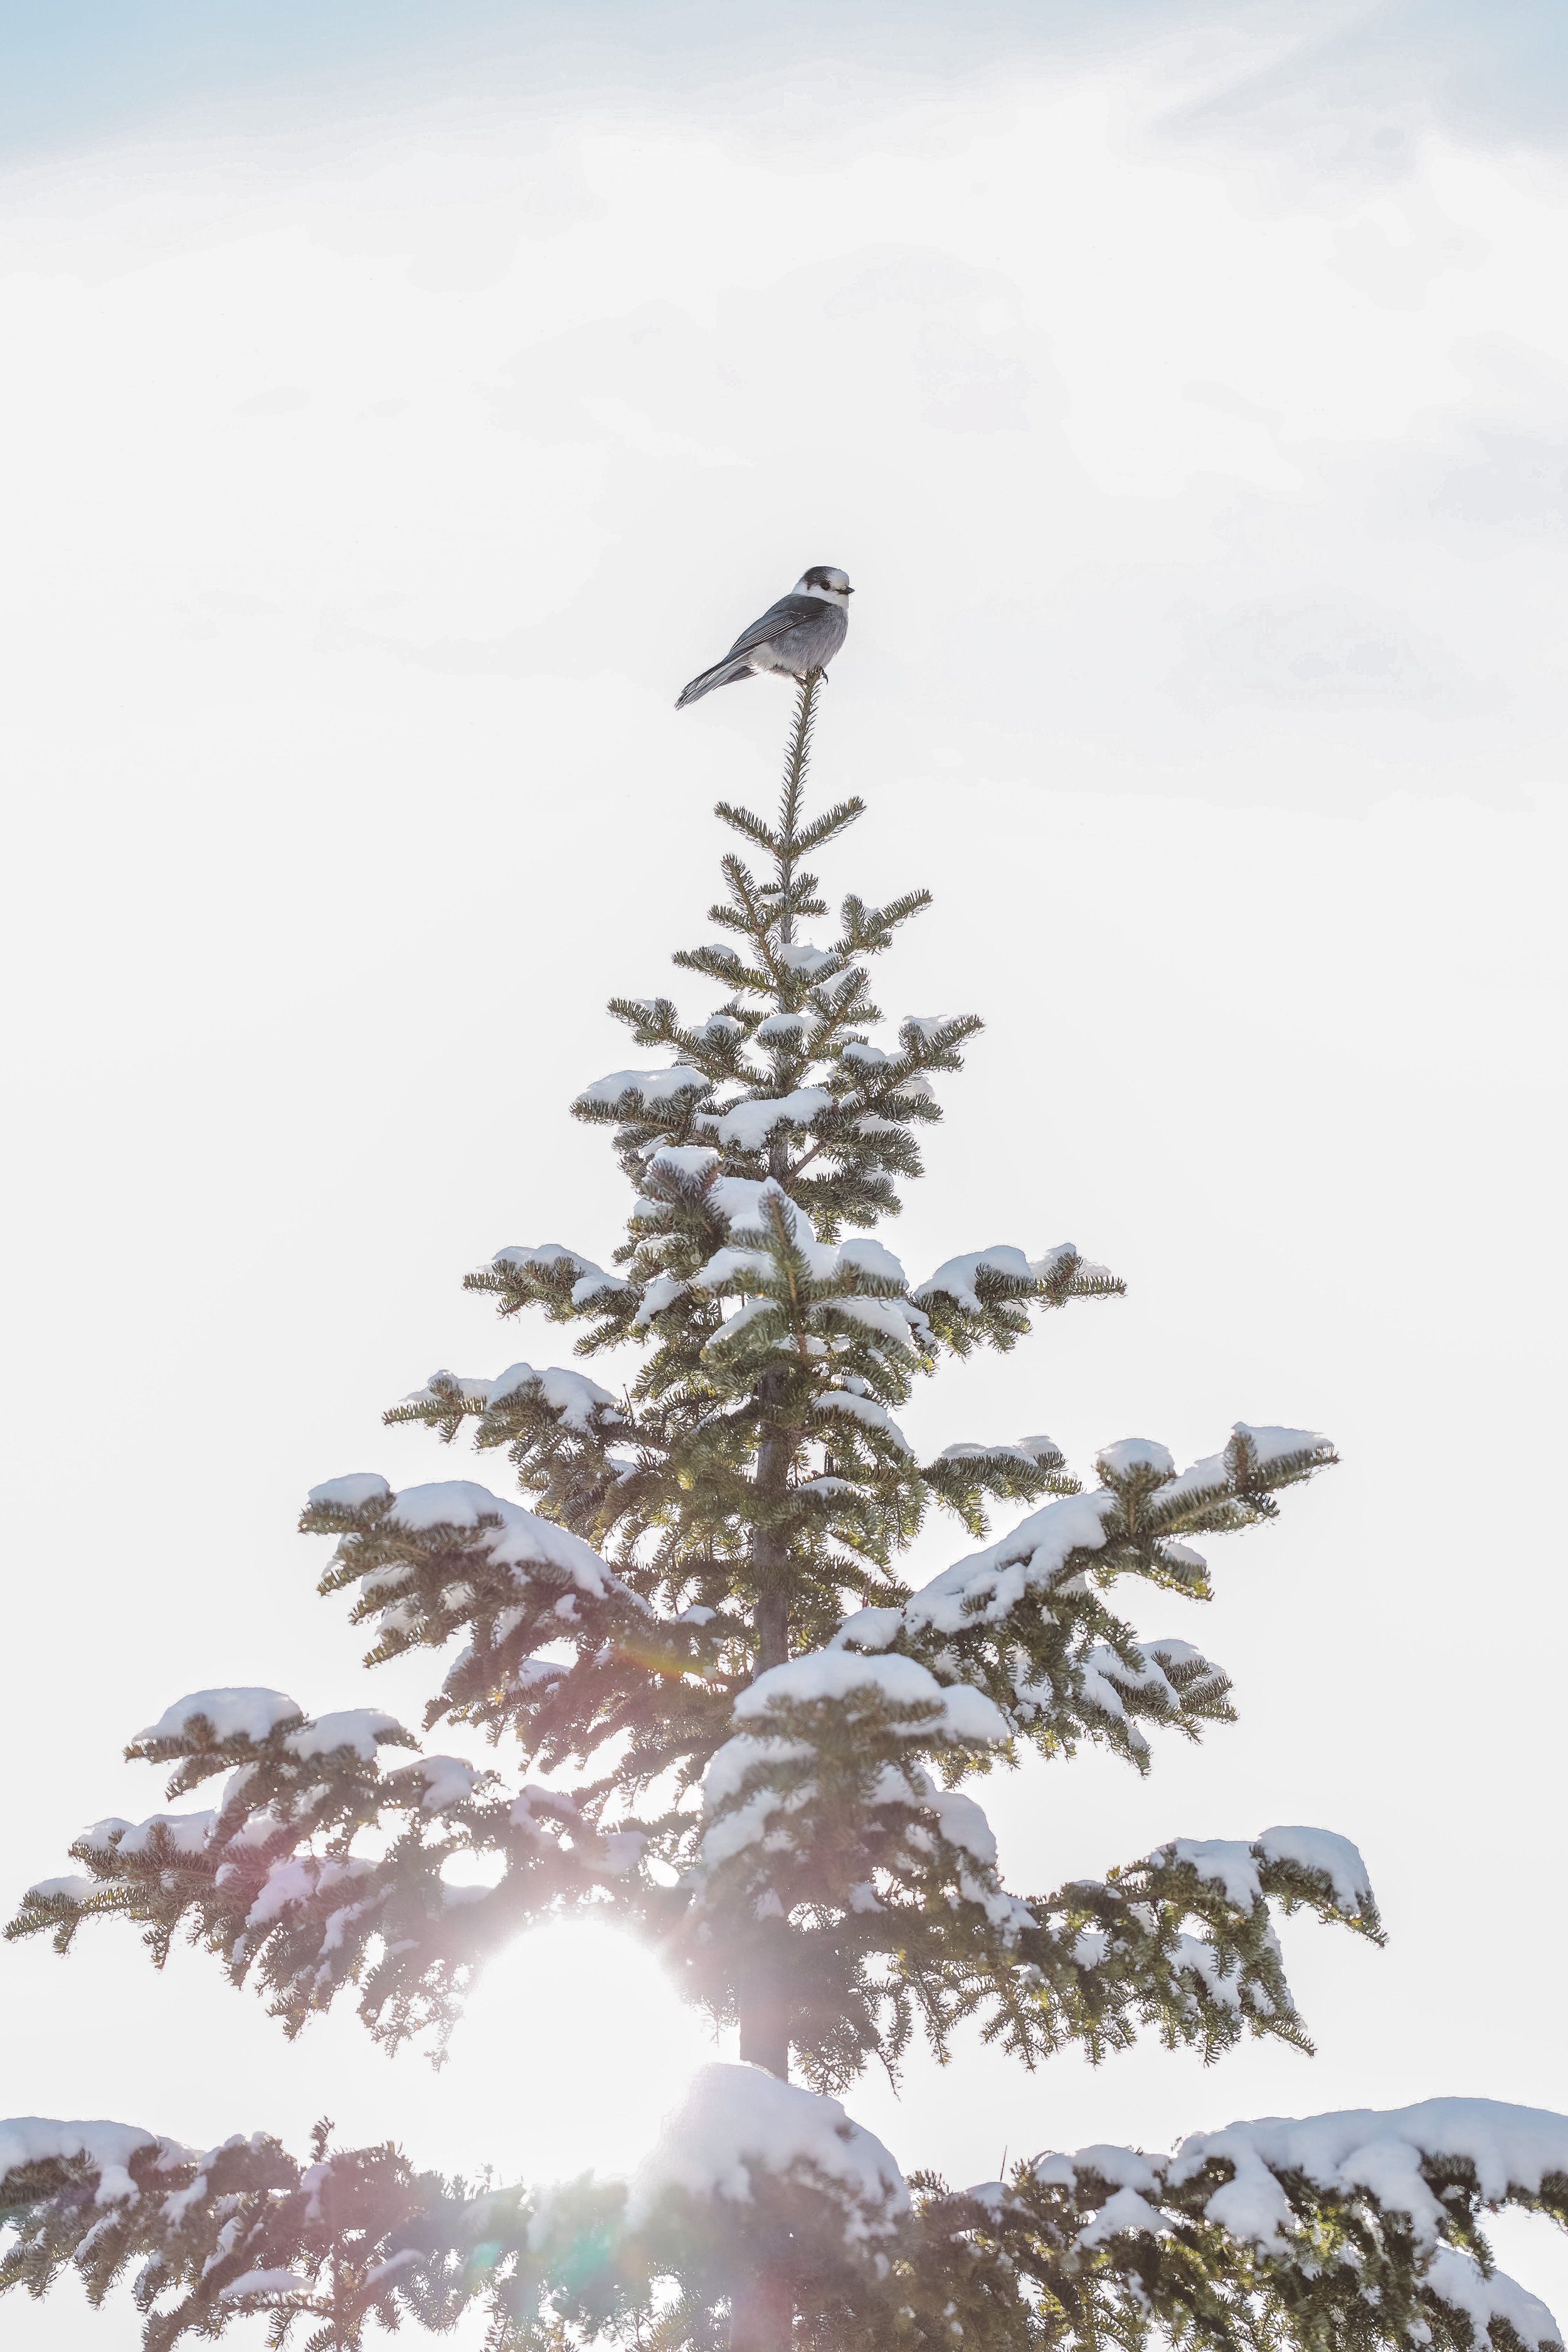 Canada Jay sitting at the top of a tree in winter - Mount du Dôme - Charlevoix - Quebec - Canada